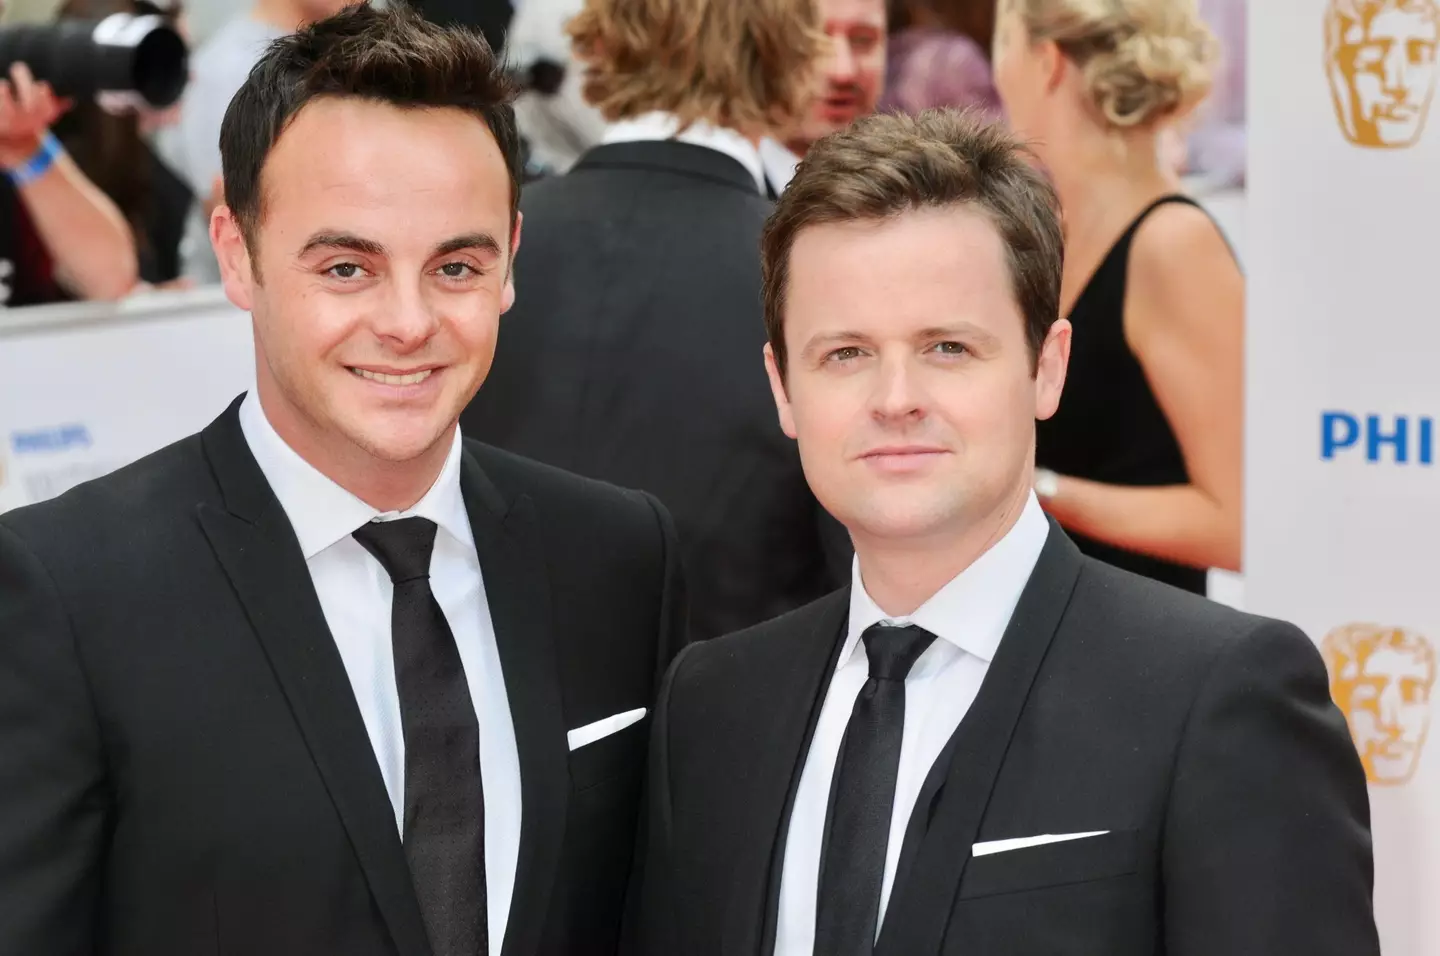 Ant and Dec are some of the most successful presenters in British TV history, and it all started for Ant thanks to his accent.